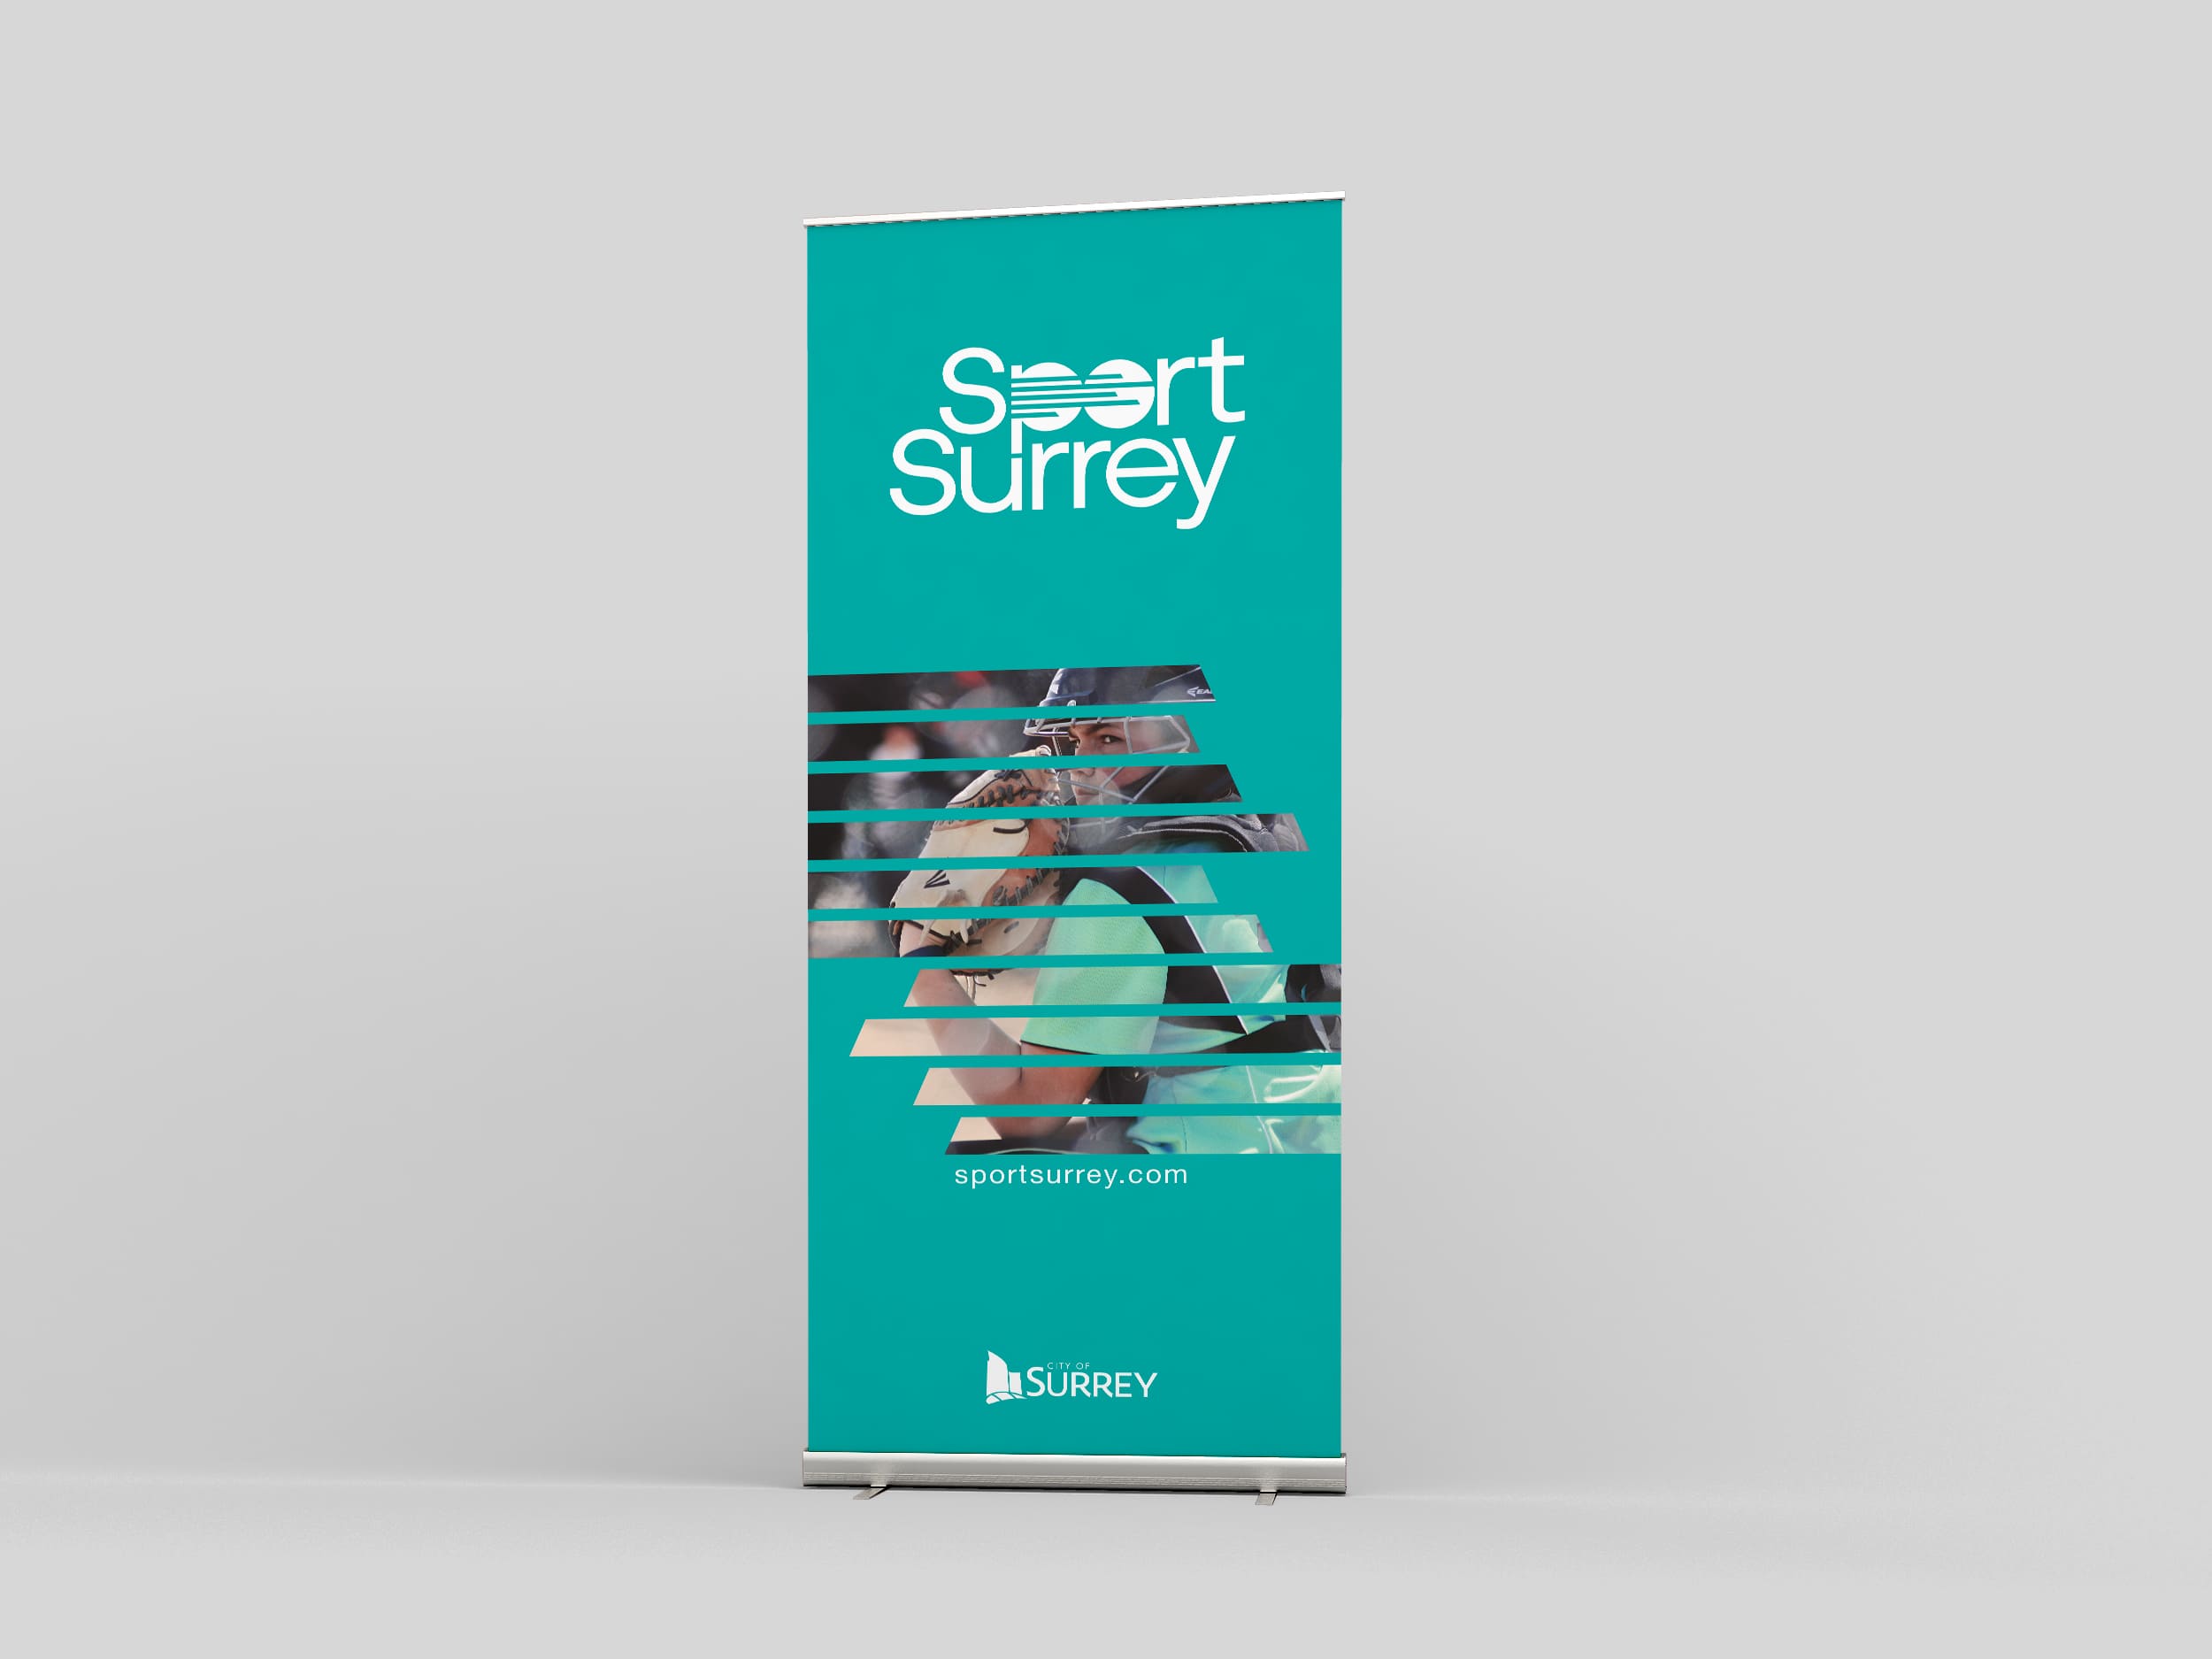 Sport Surrey's mock-cover of a teal brochure, featuring refreshed logo